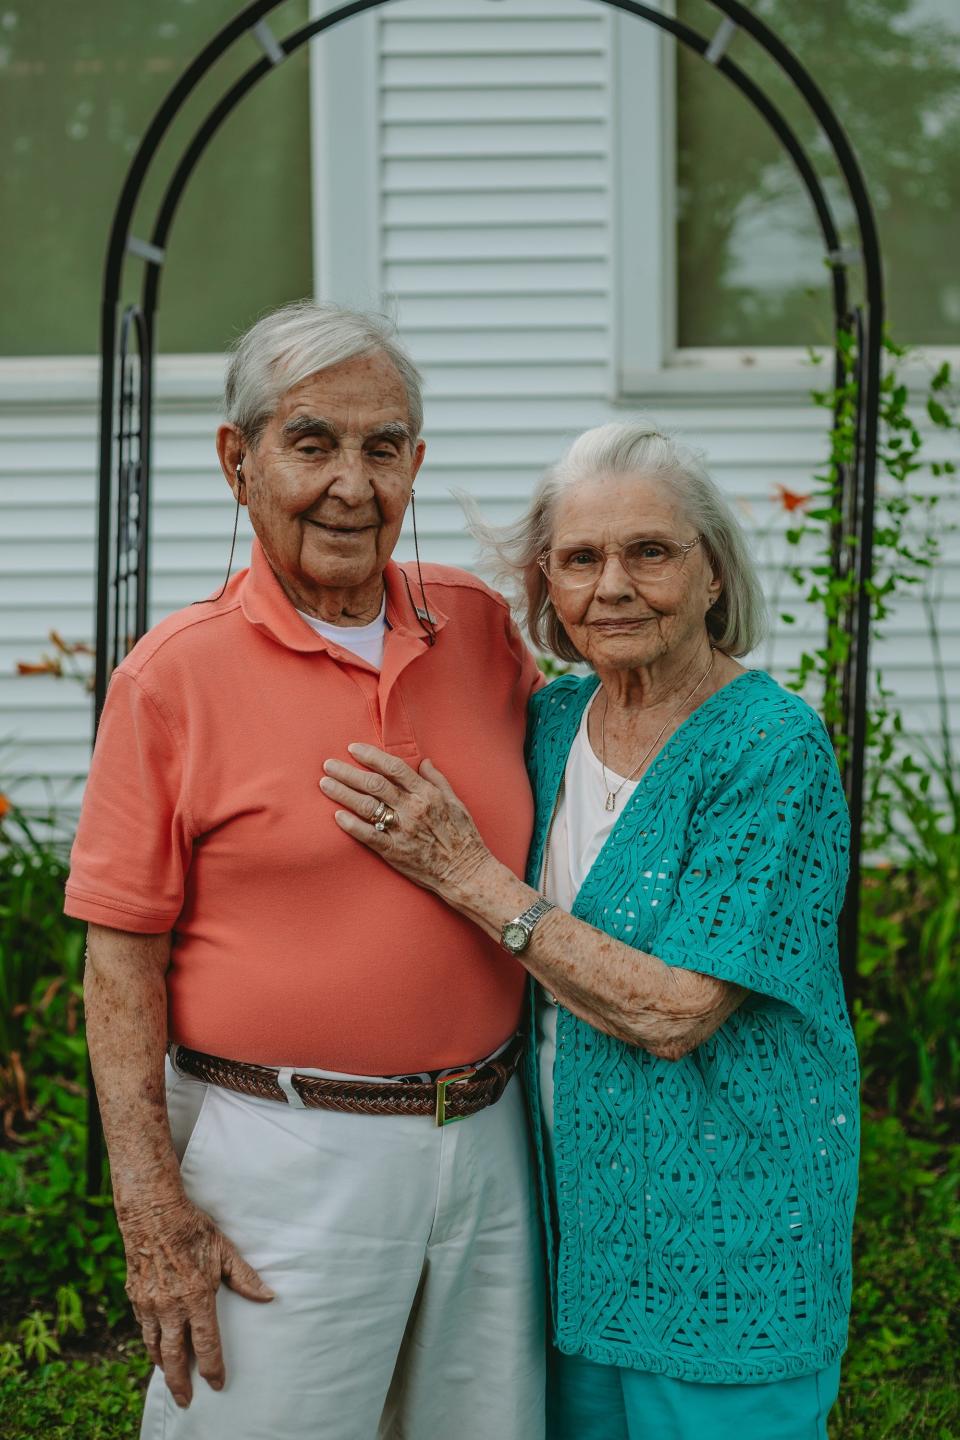 Paul and Nannette White celebrated their 70th wedding anniversary in 2021. These seniors love staying active. Paul has been a member of the Marion Senior Center since 1993. He was a member of the Steppin’ Seniors, a line dancing group, for more than 20 years.